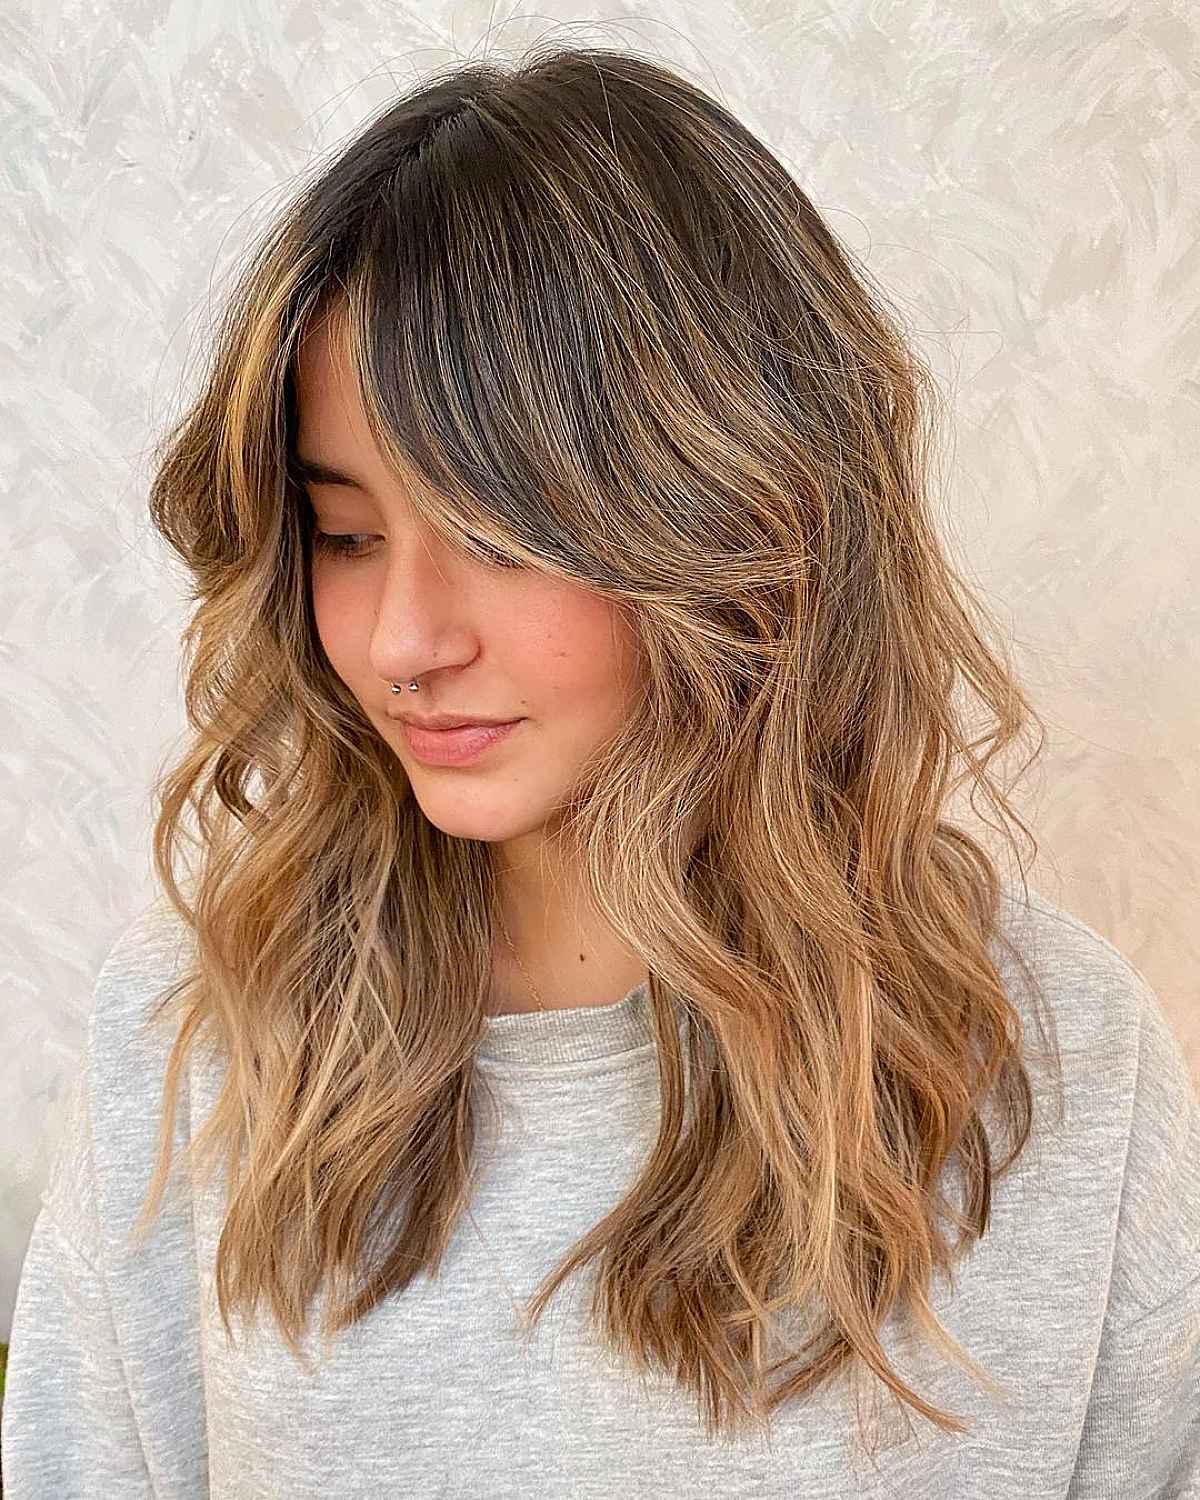 Tousled Waves with Bangs